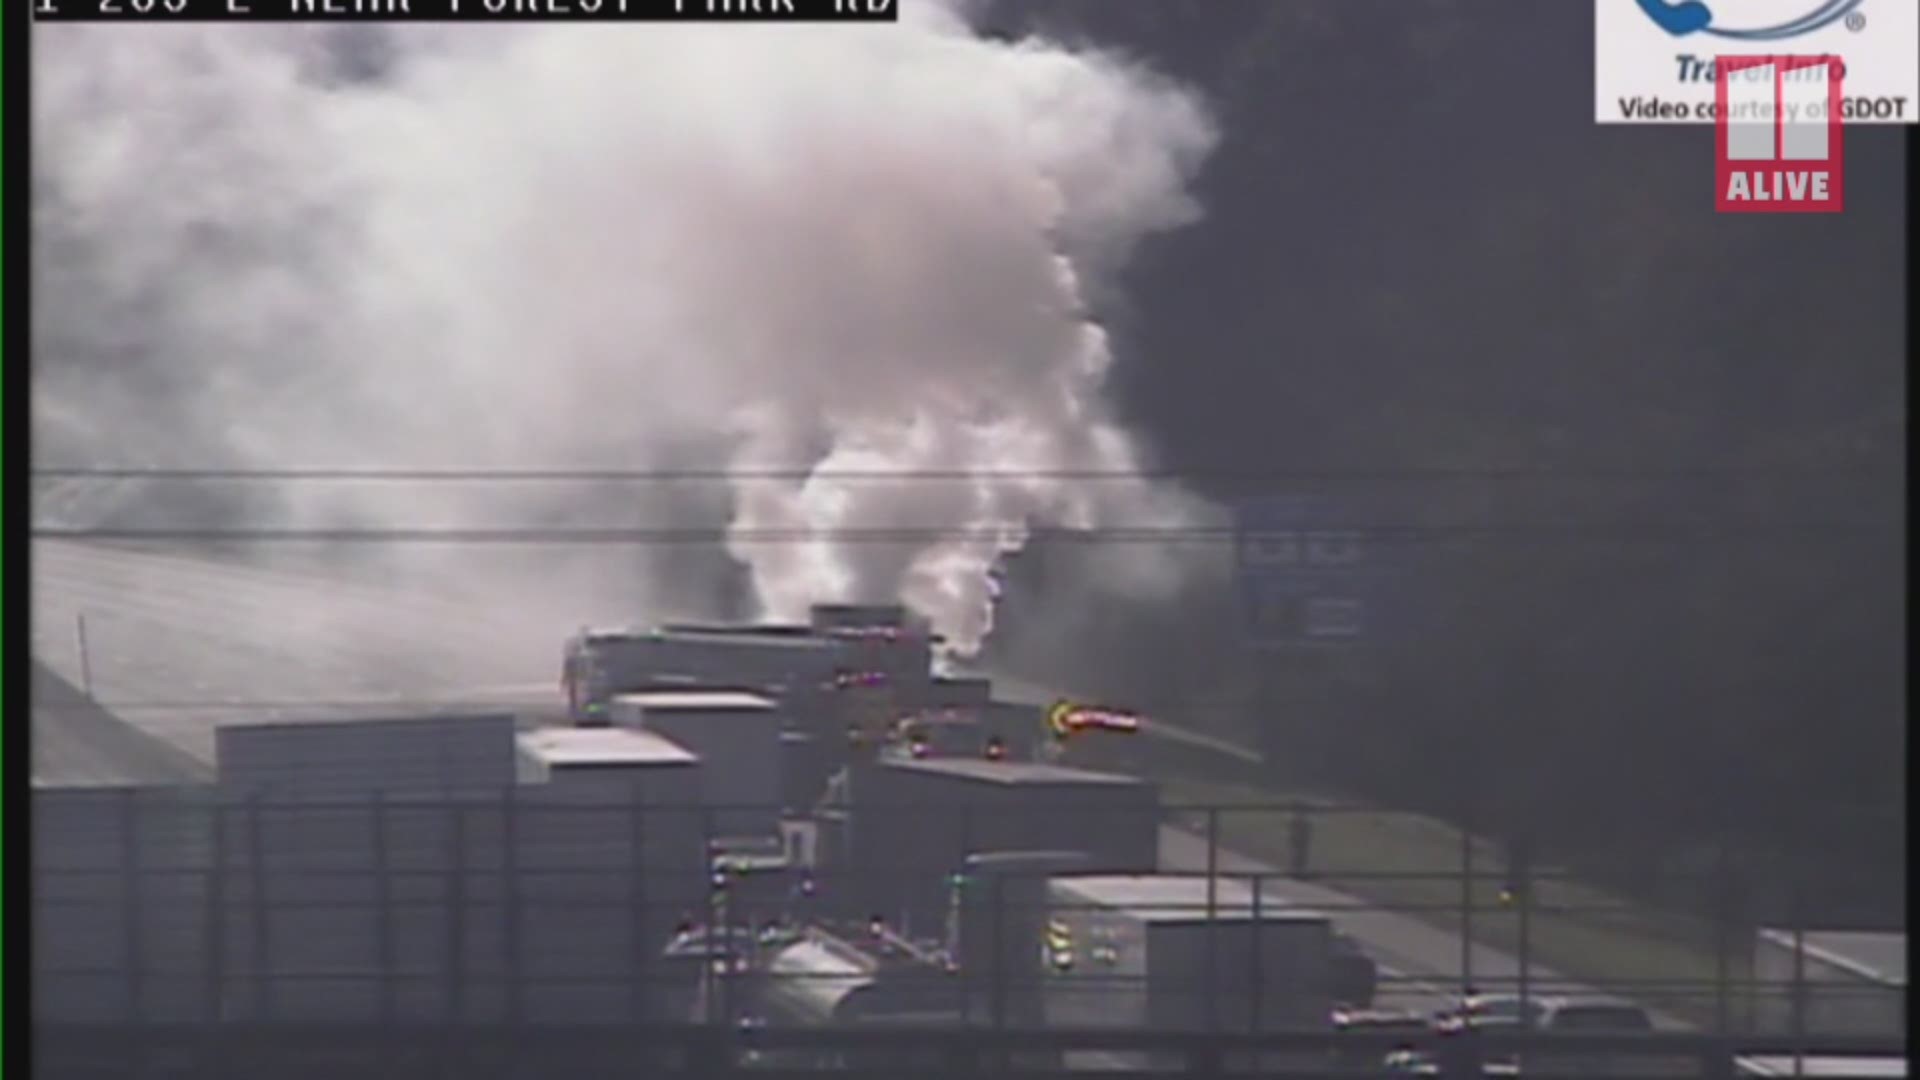 The fire blocked westbound lanes on the south side of I-285 during the heart of evening rush-hour on Valentine's Day.